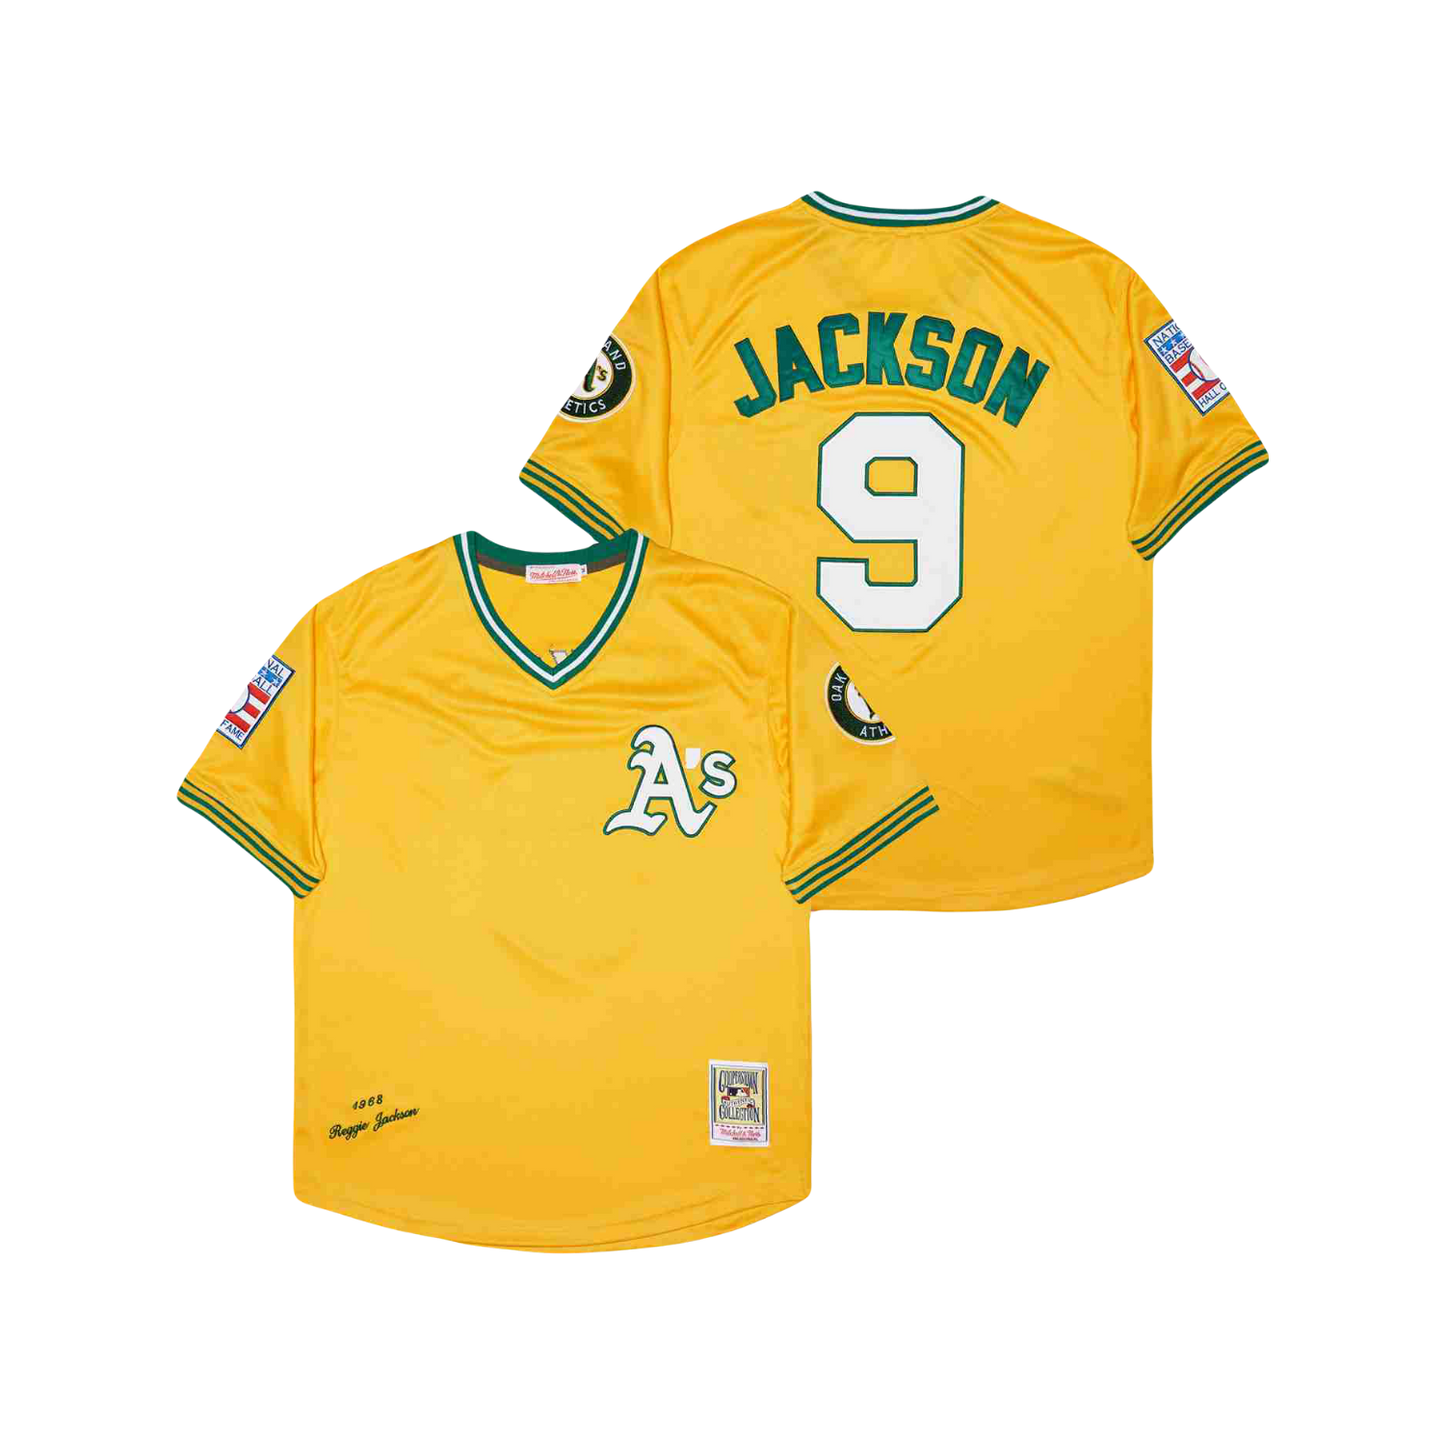 Oakland A’s Reggie Jackson 1968 Mitchell Ness Cooperstown Classic Iconic MLB Jersey